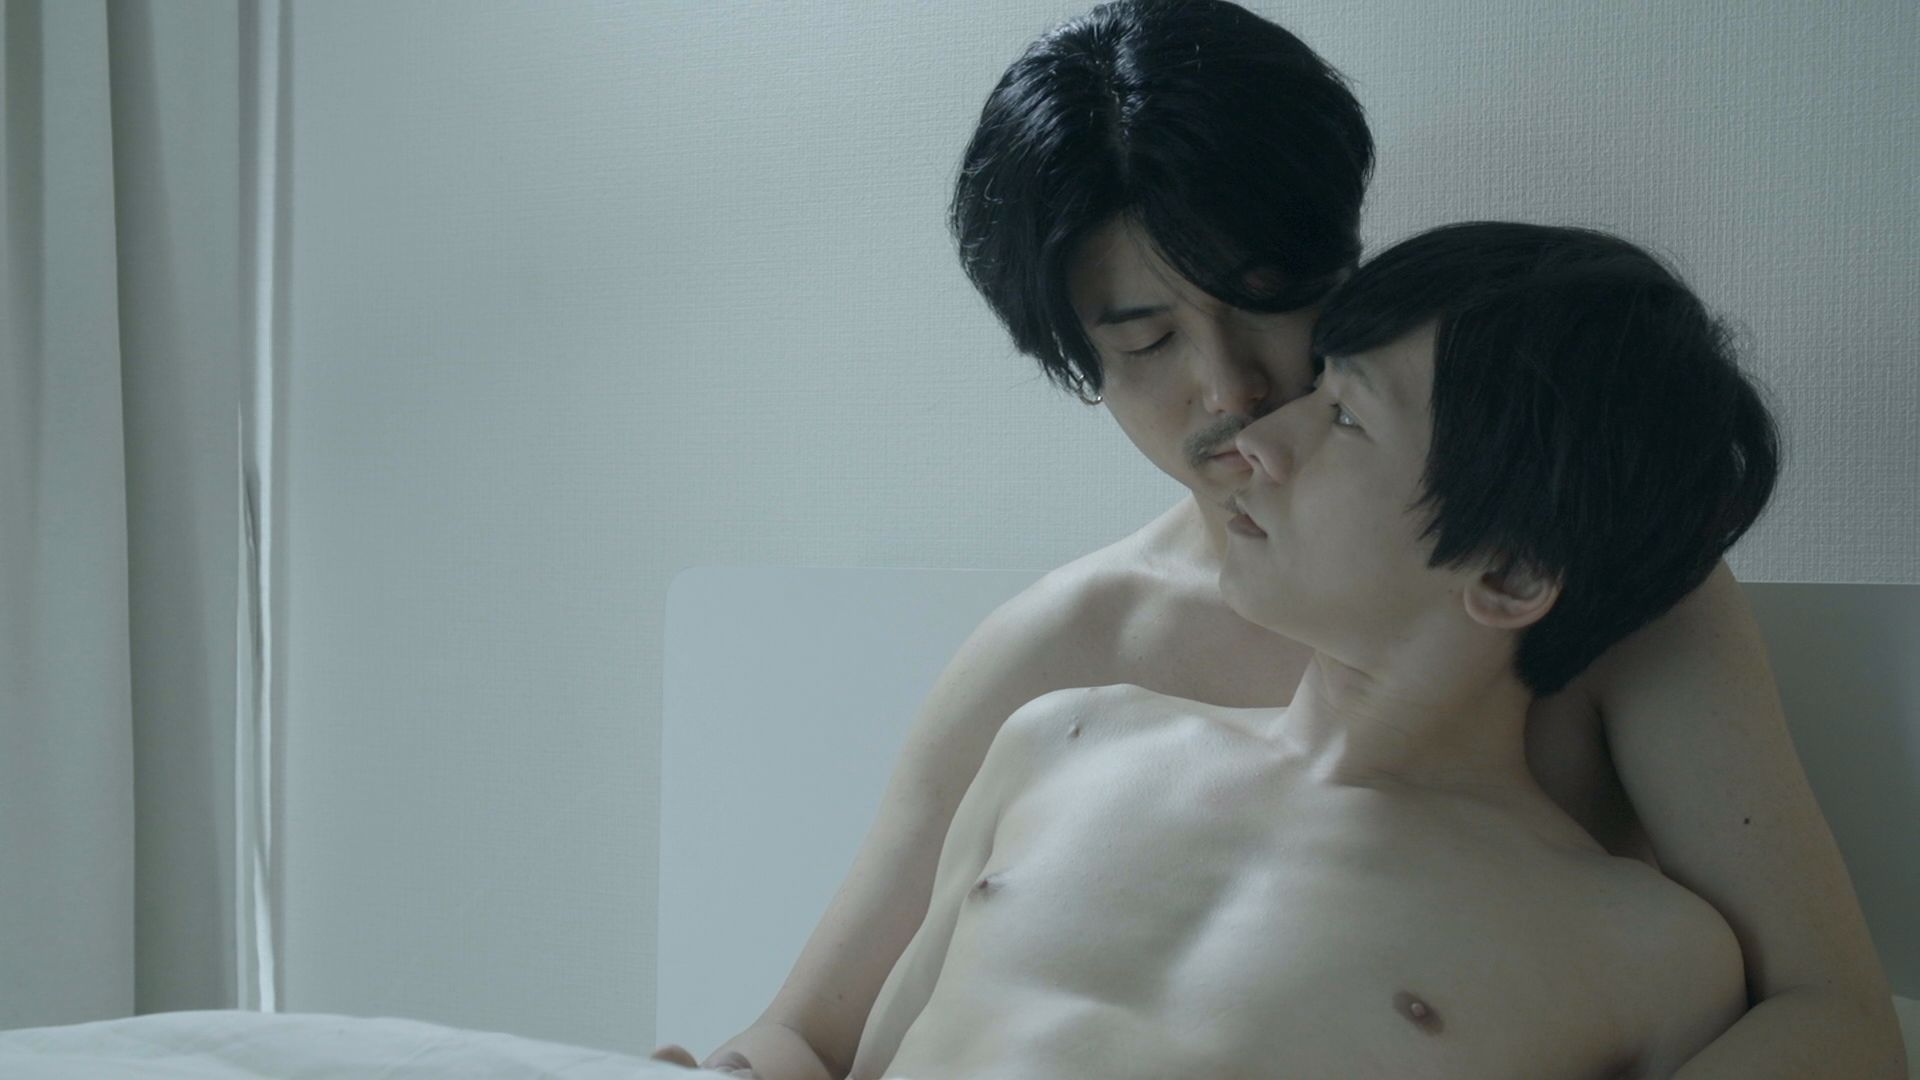 10 BL erotic films you cannot miss | GagaTai